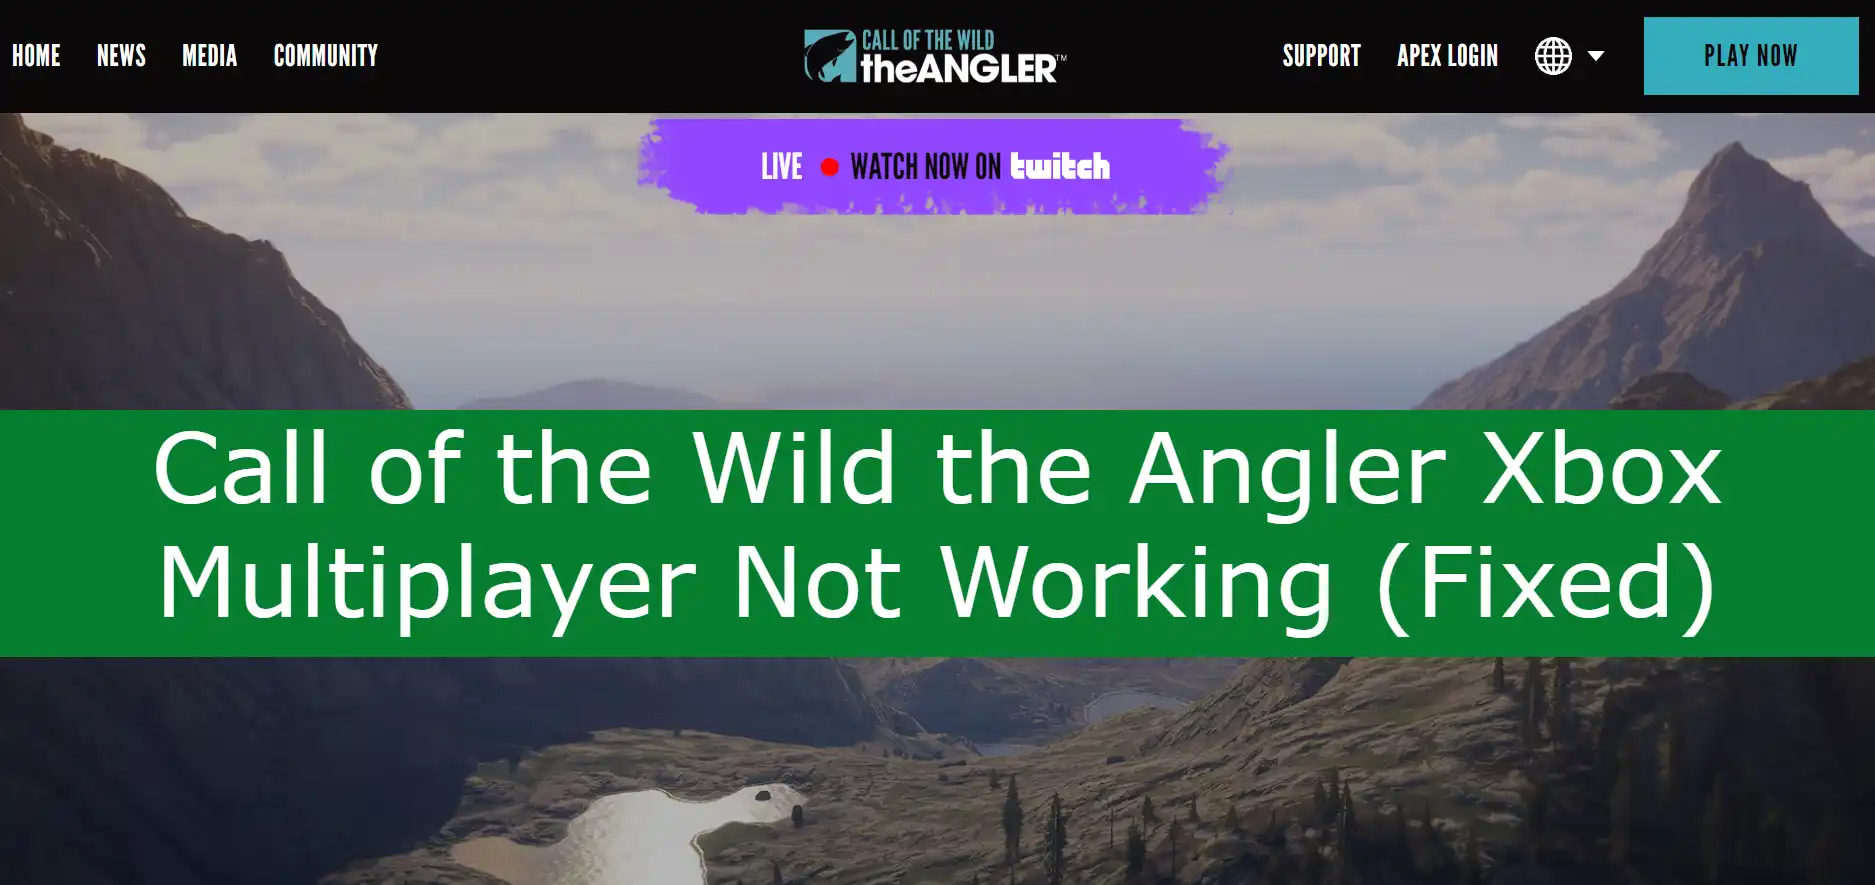 You are currently viewing Call of the Wild the Angler Xbox Multiplayer Not Working (Fixed)